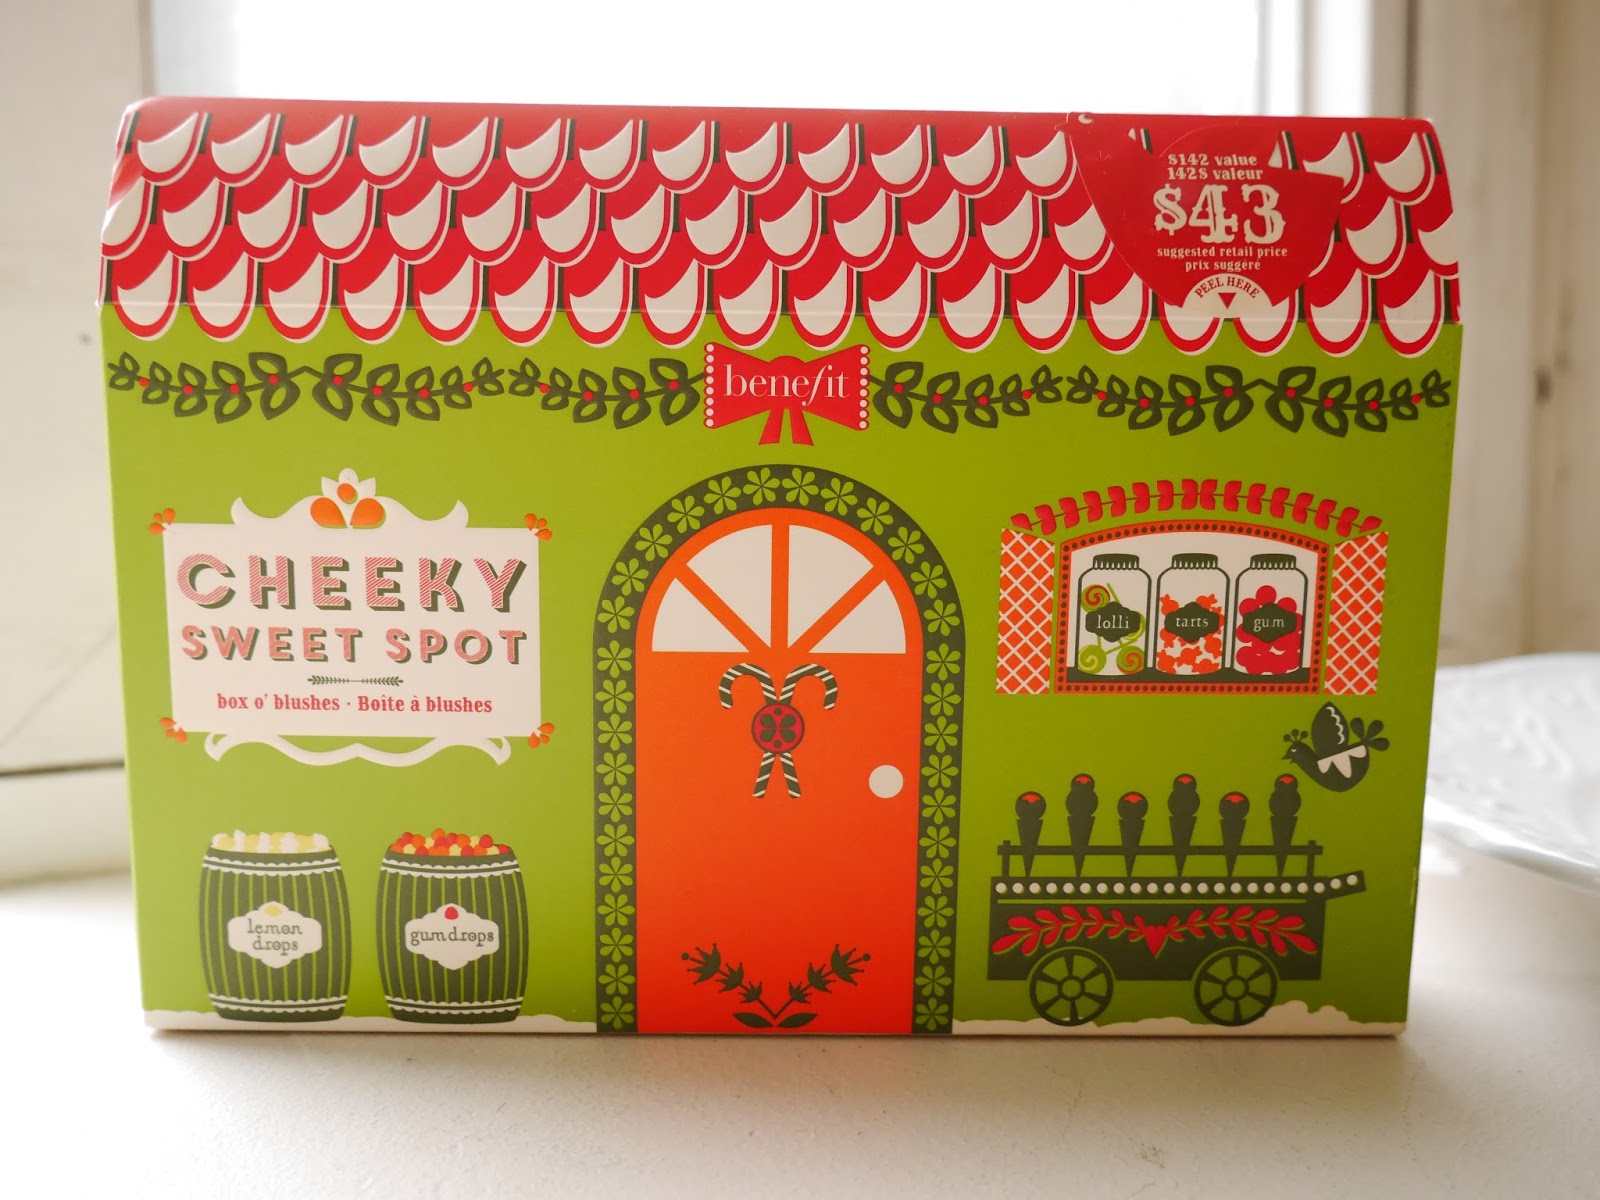 Benefit Cheeky Sweet Spot Box O'Blushes review swatch